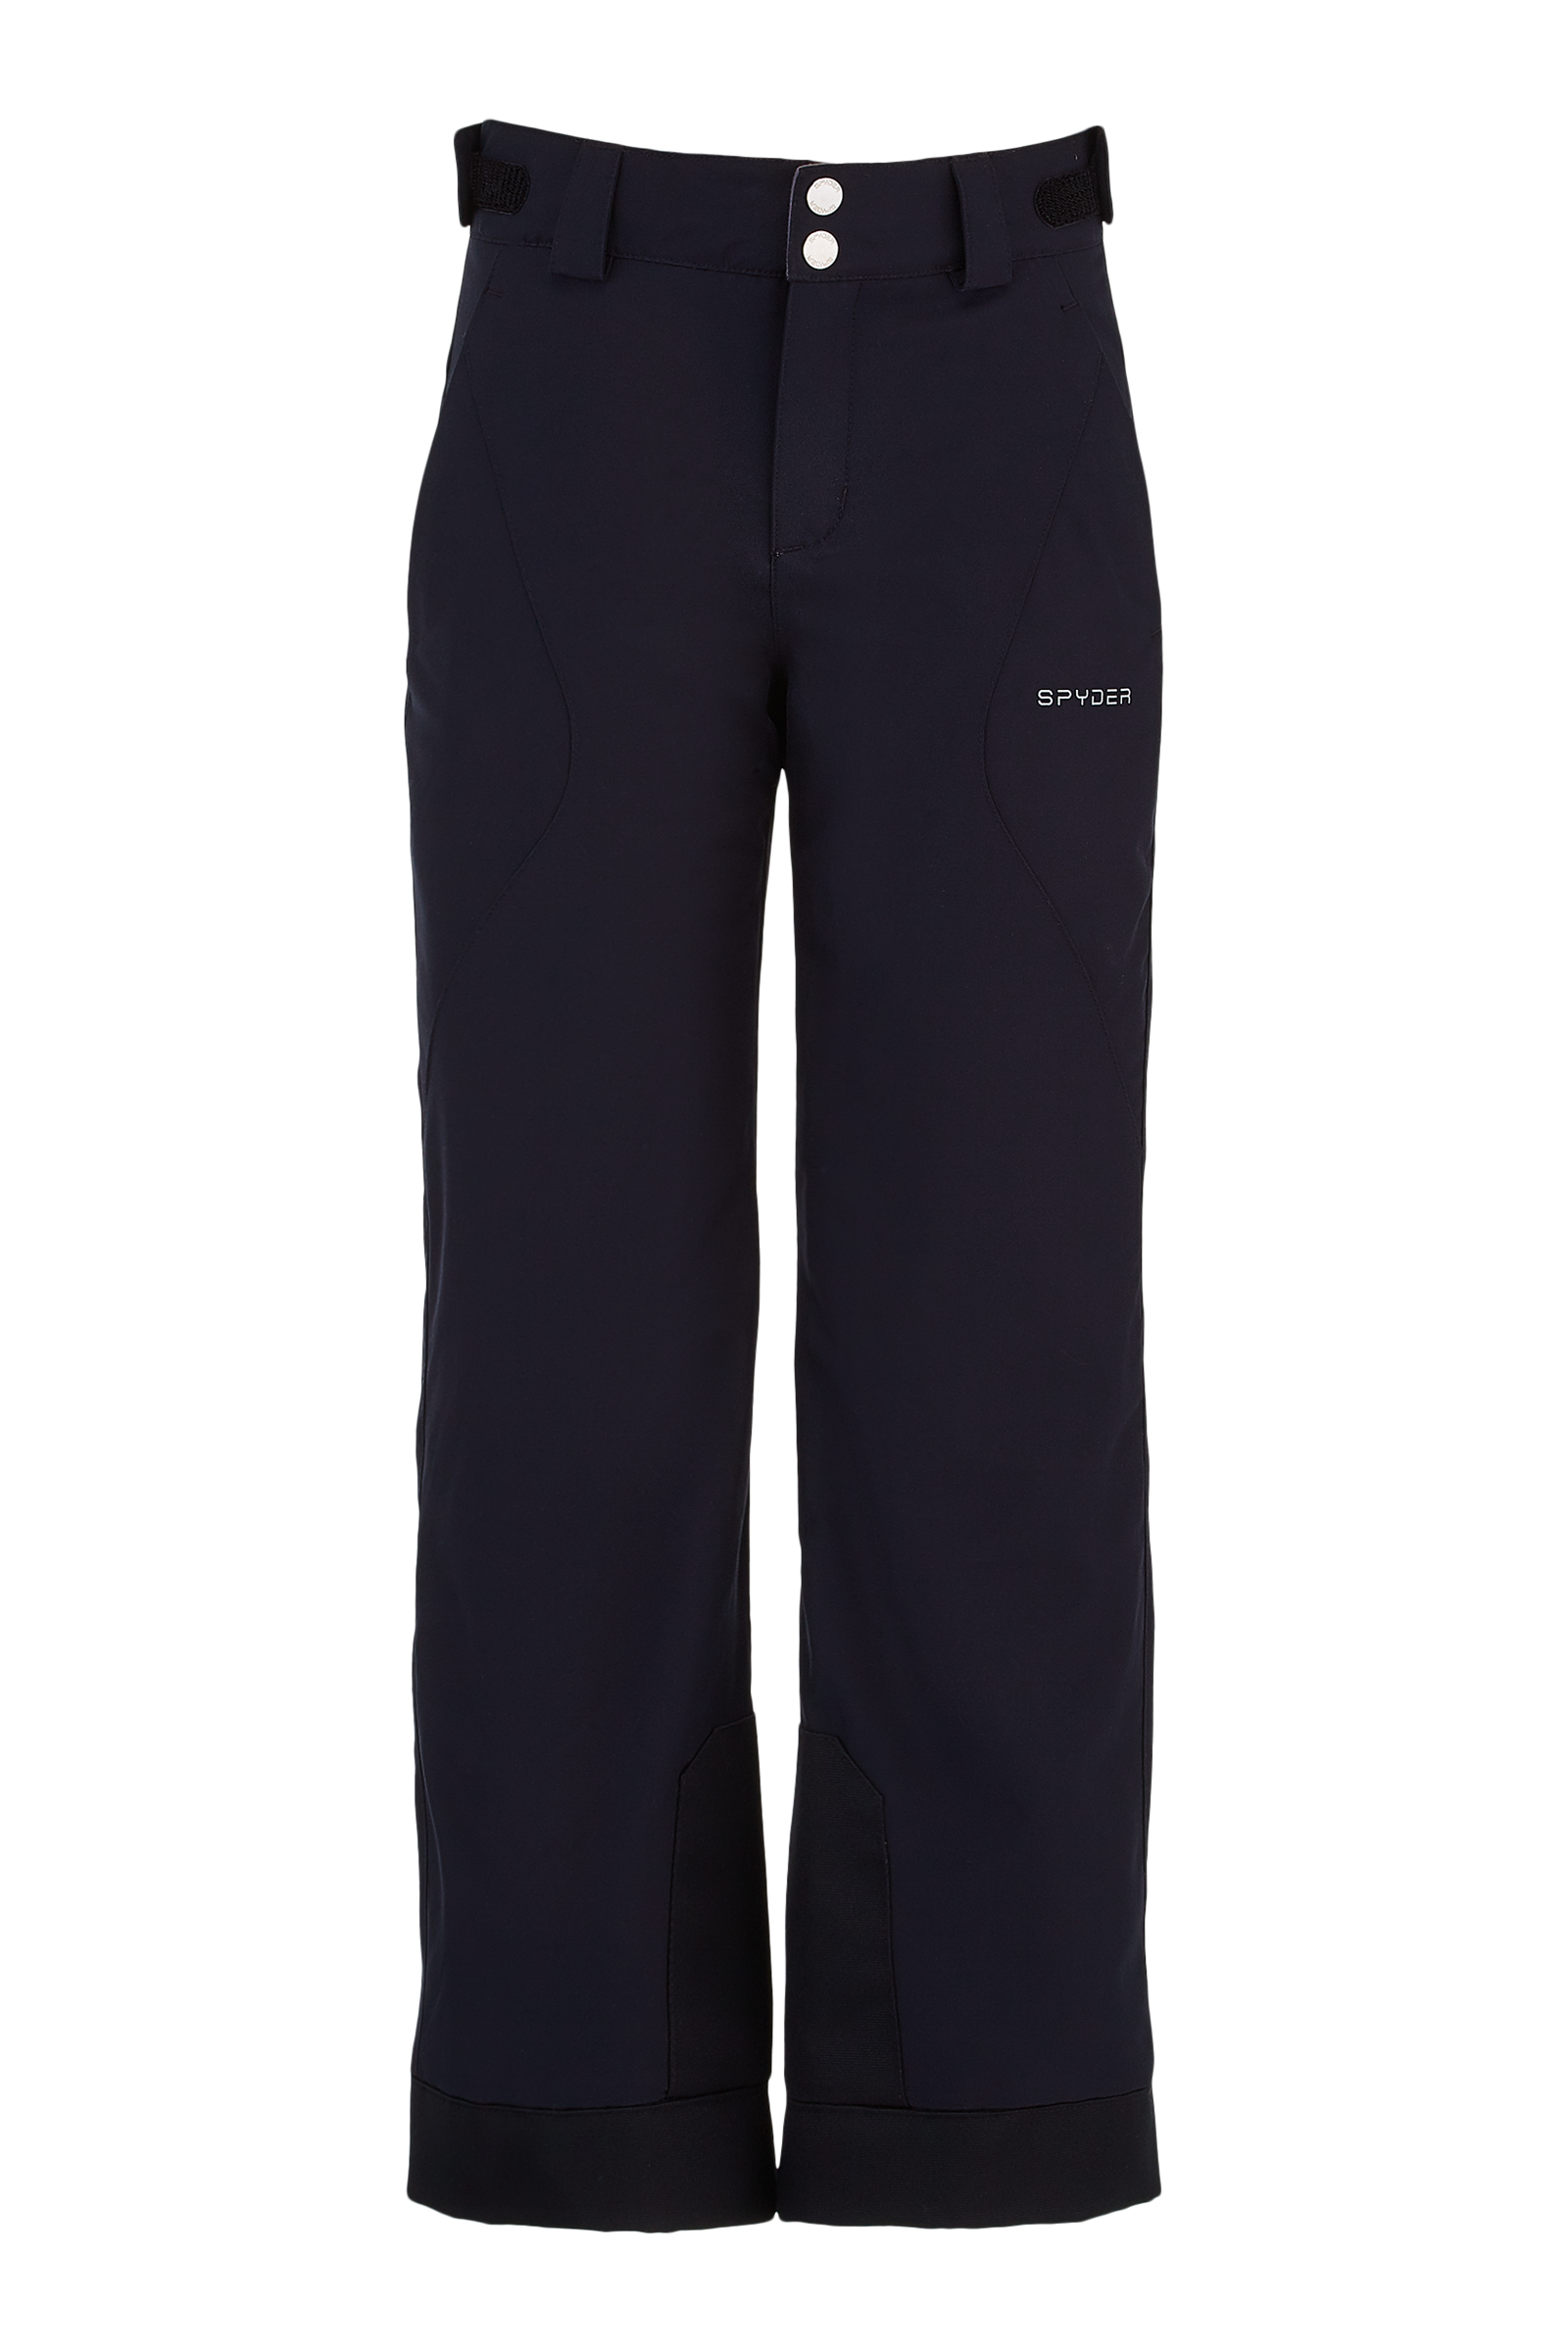 Spyder Girl's Olympia Pant - Winter 2021/2022